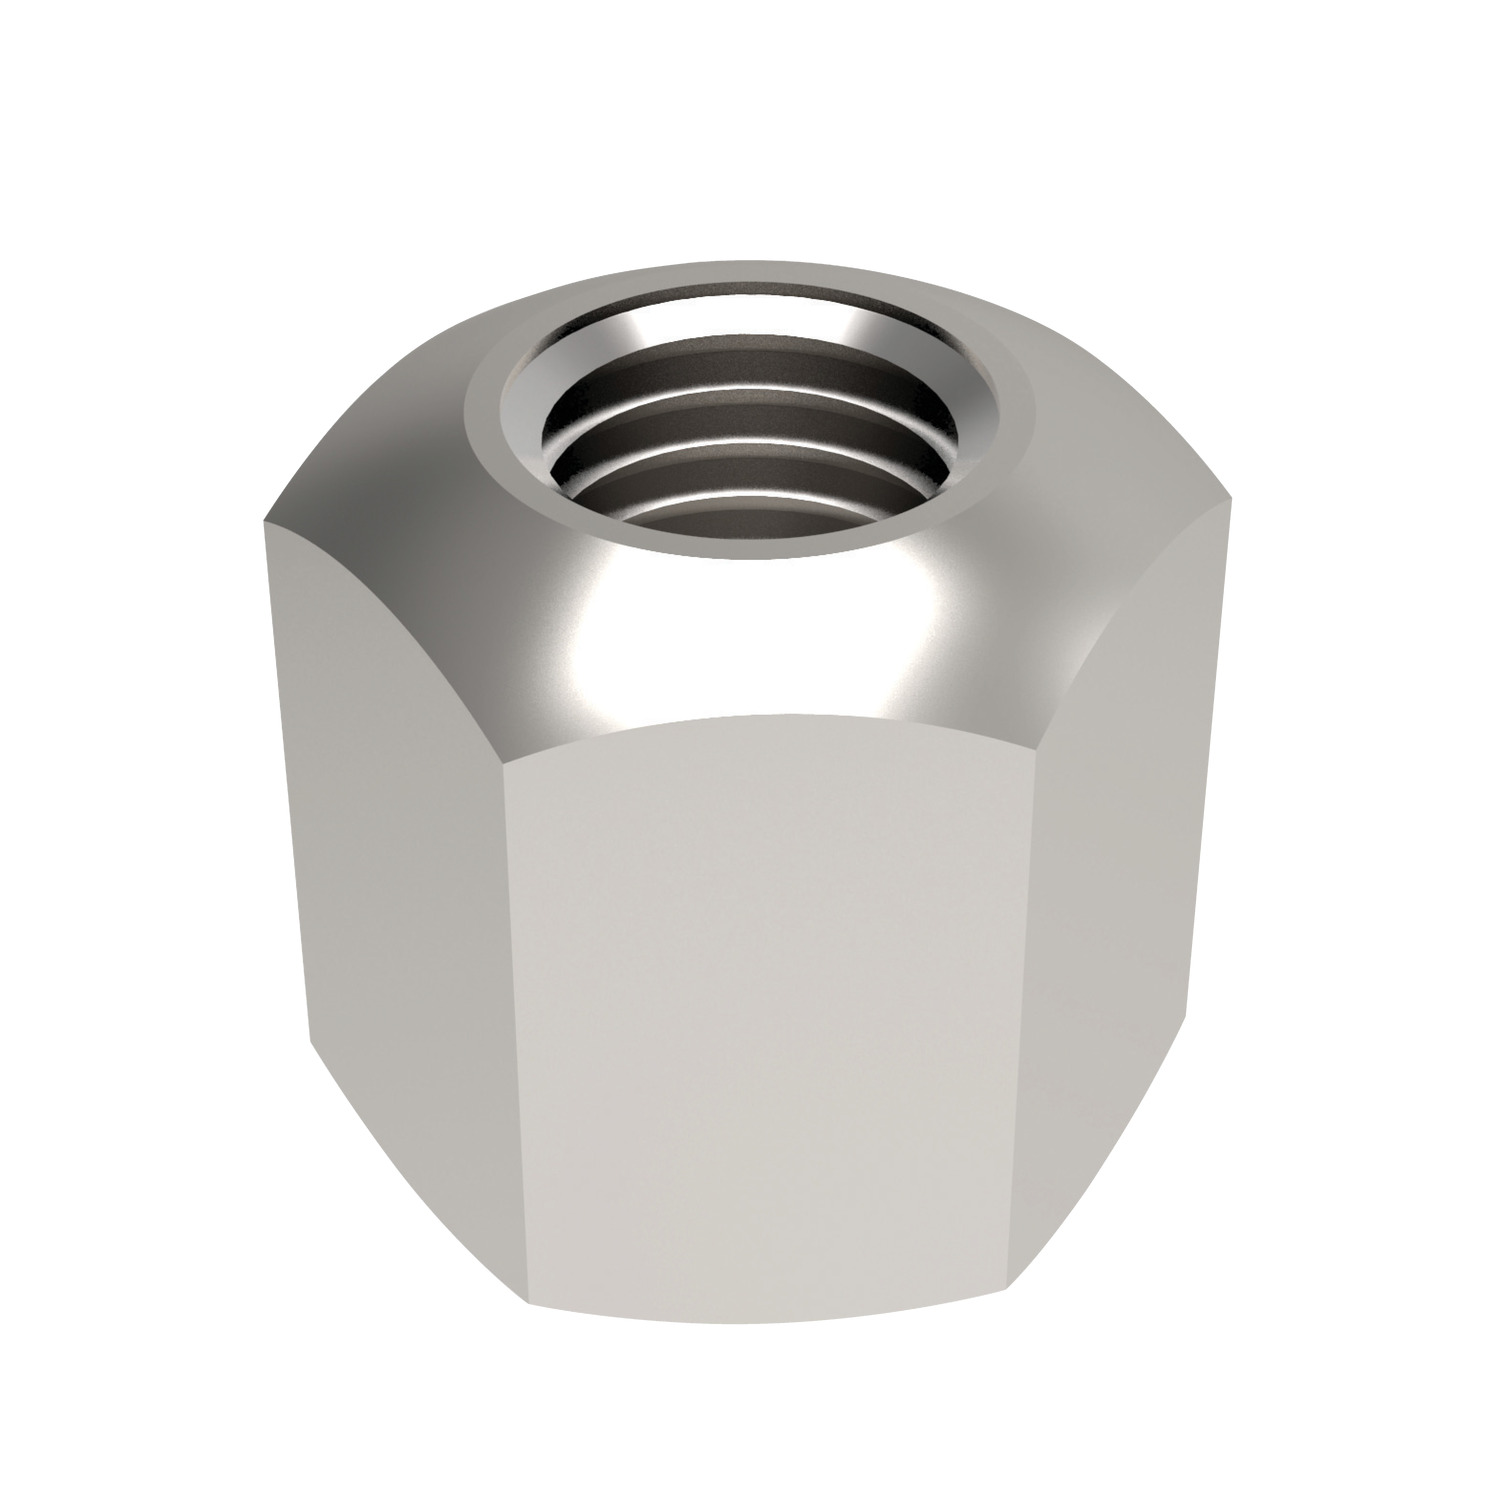 Fixture & Collar Nuts - Stainless Steel Stainless steel fixture nuts, collar nuts and hexagon nuts made to relevant DIN standards.